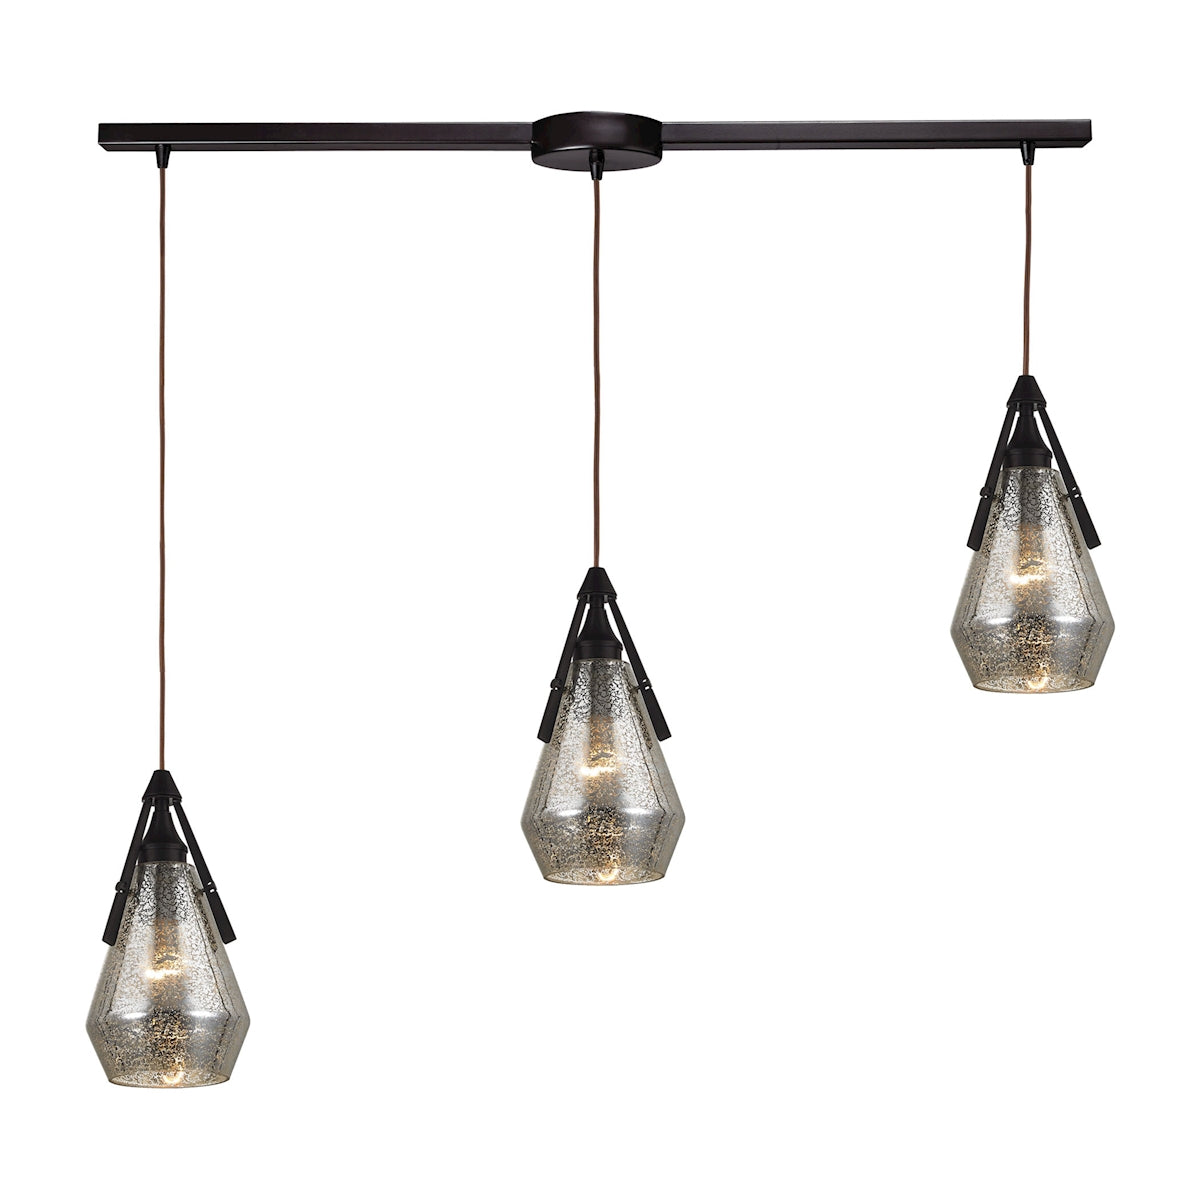 ELK Lighting 46172/3L Duncan 3-Light Linear Pendant Fixture in Oil Rubbed Bronze with Smoked Crackle Glass